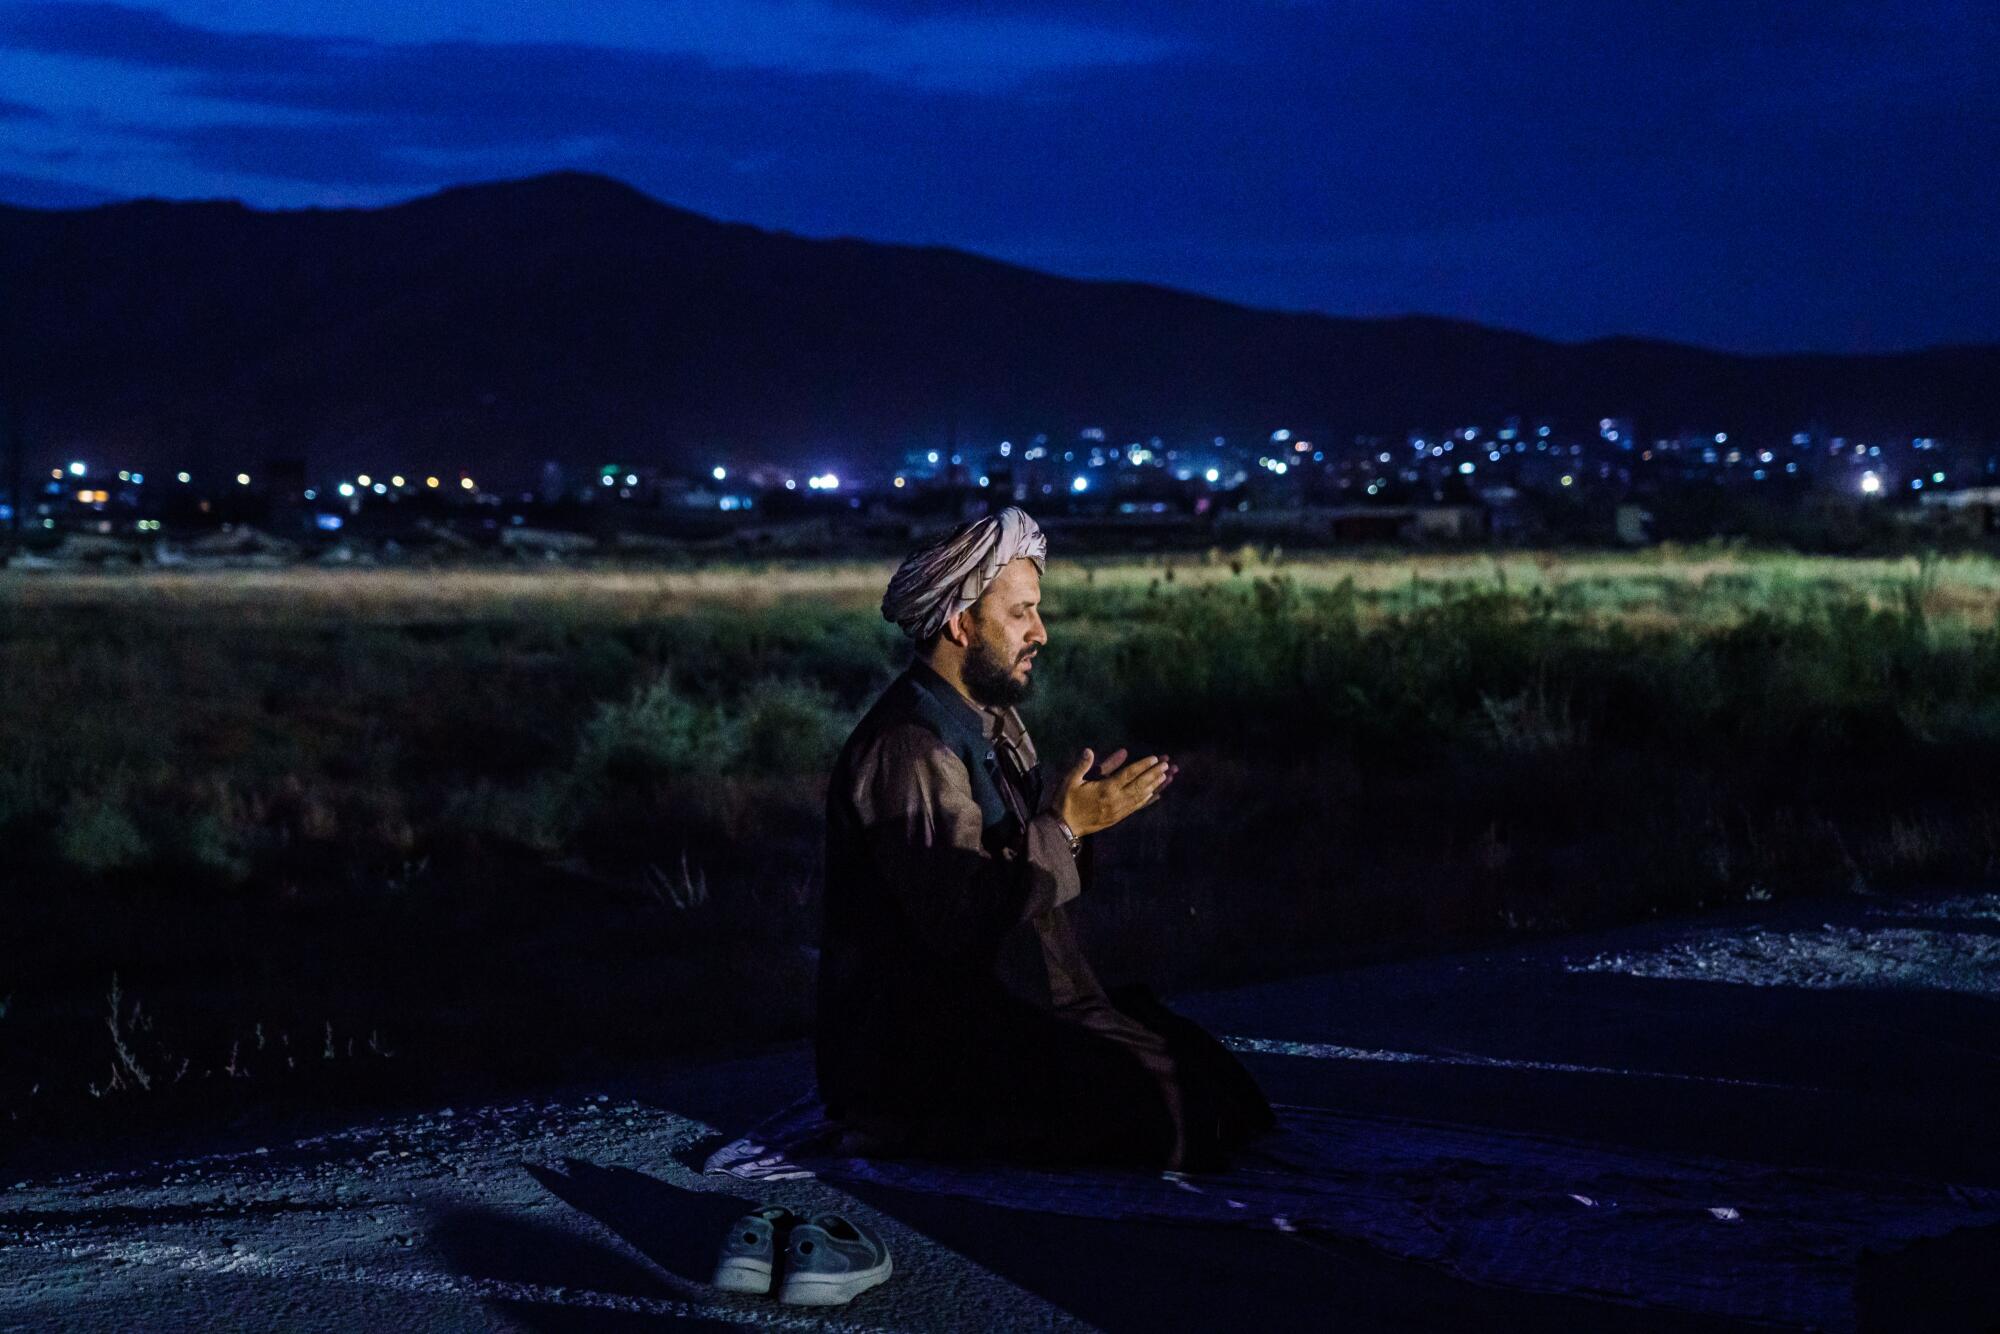 A Taliban fighter kneels in the dark while city lights are in the distance behind him